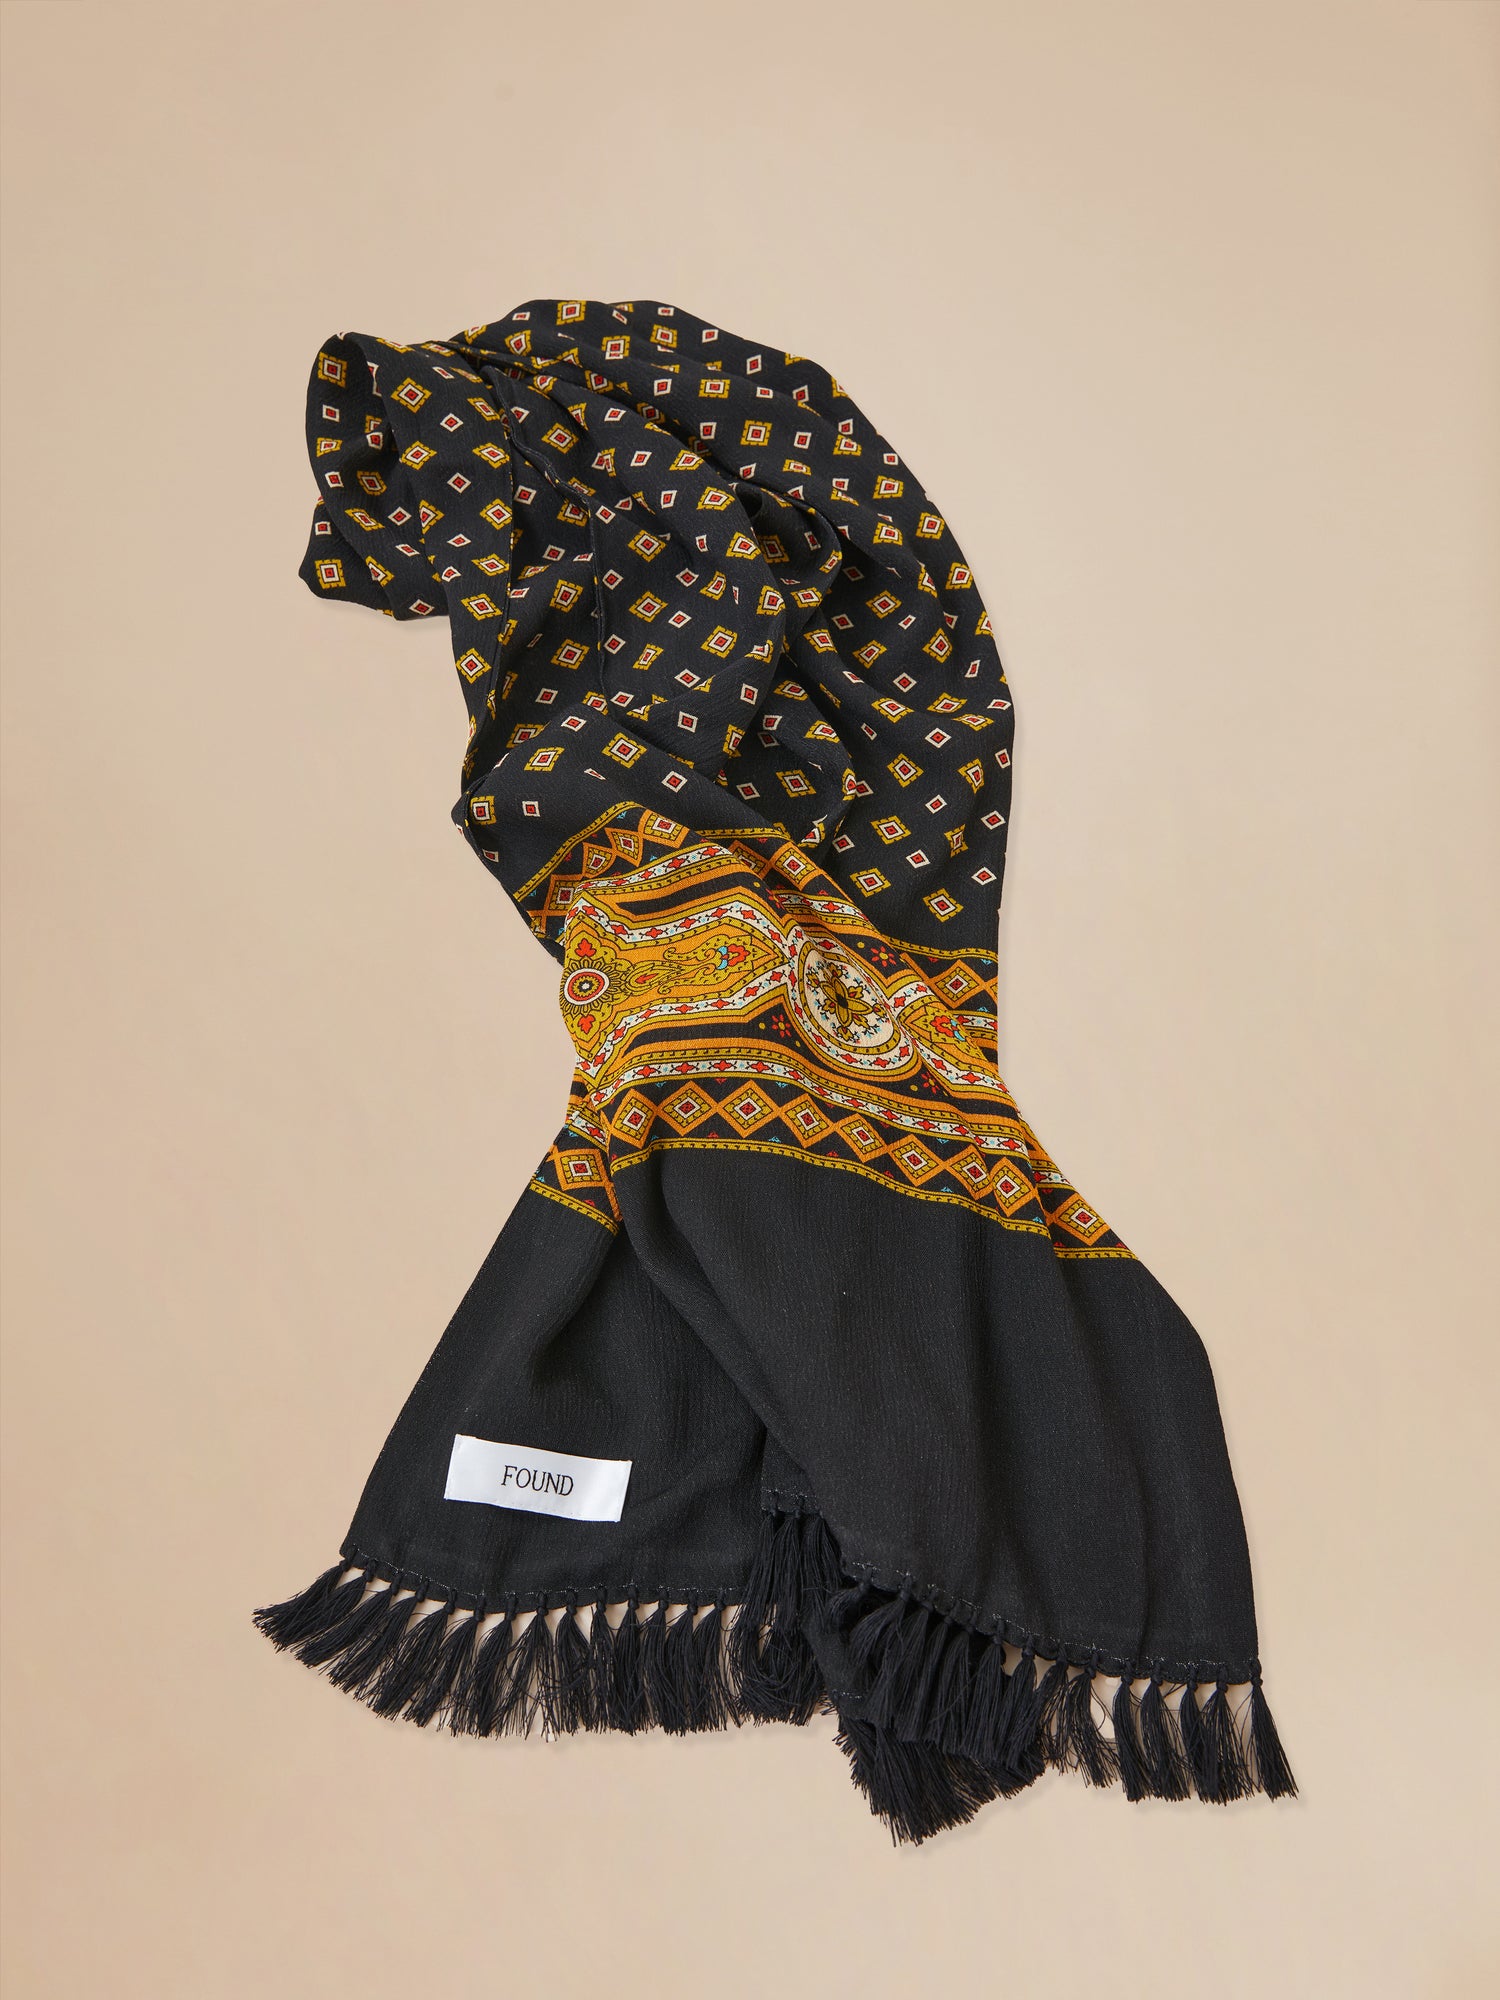 A black and yellow Found Pastures Print Scarf with hand-tied tassels.